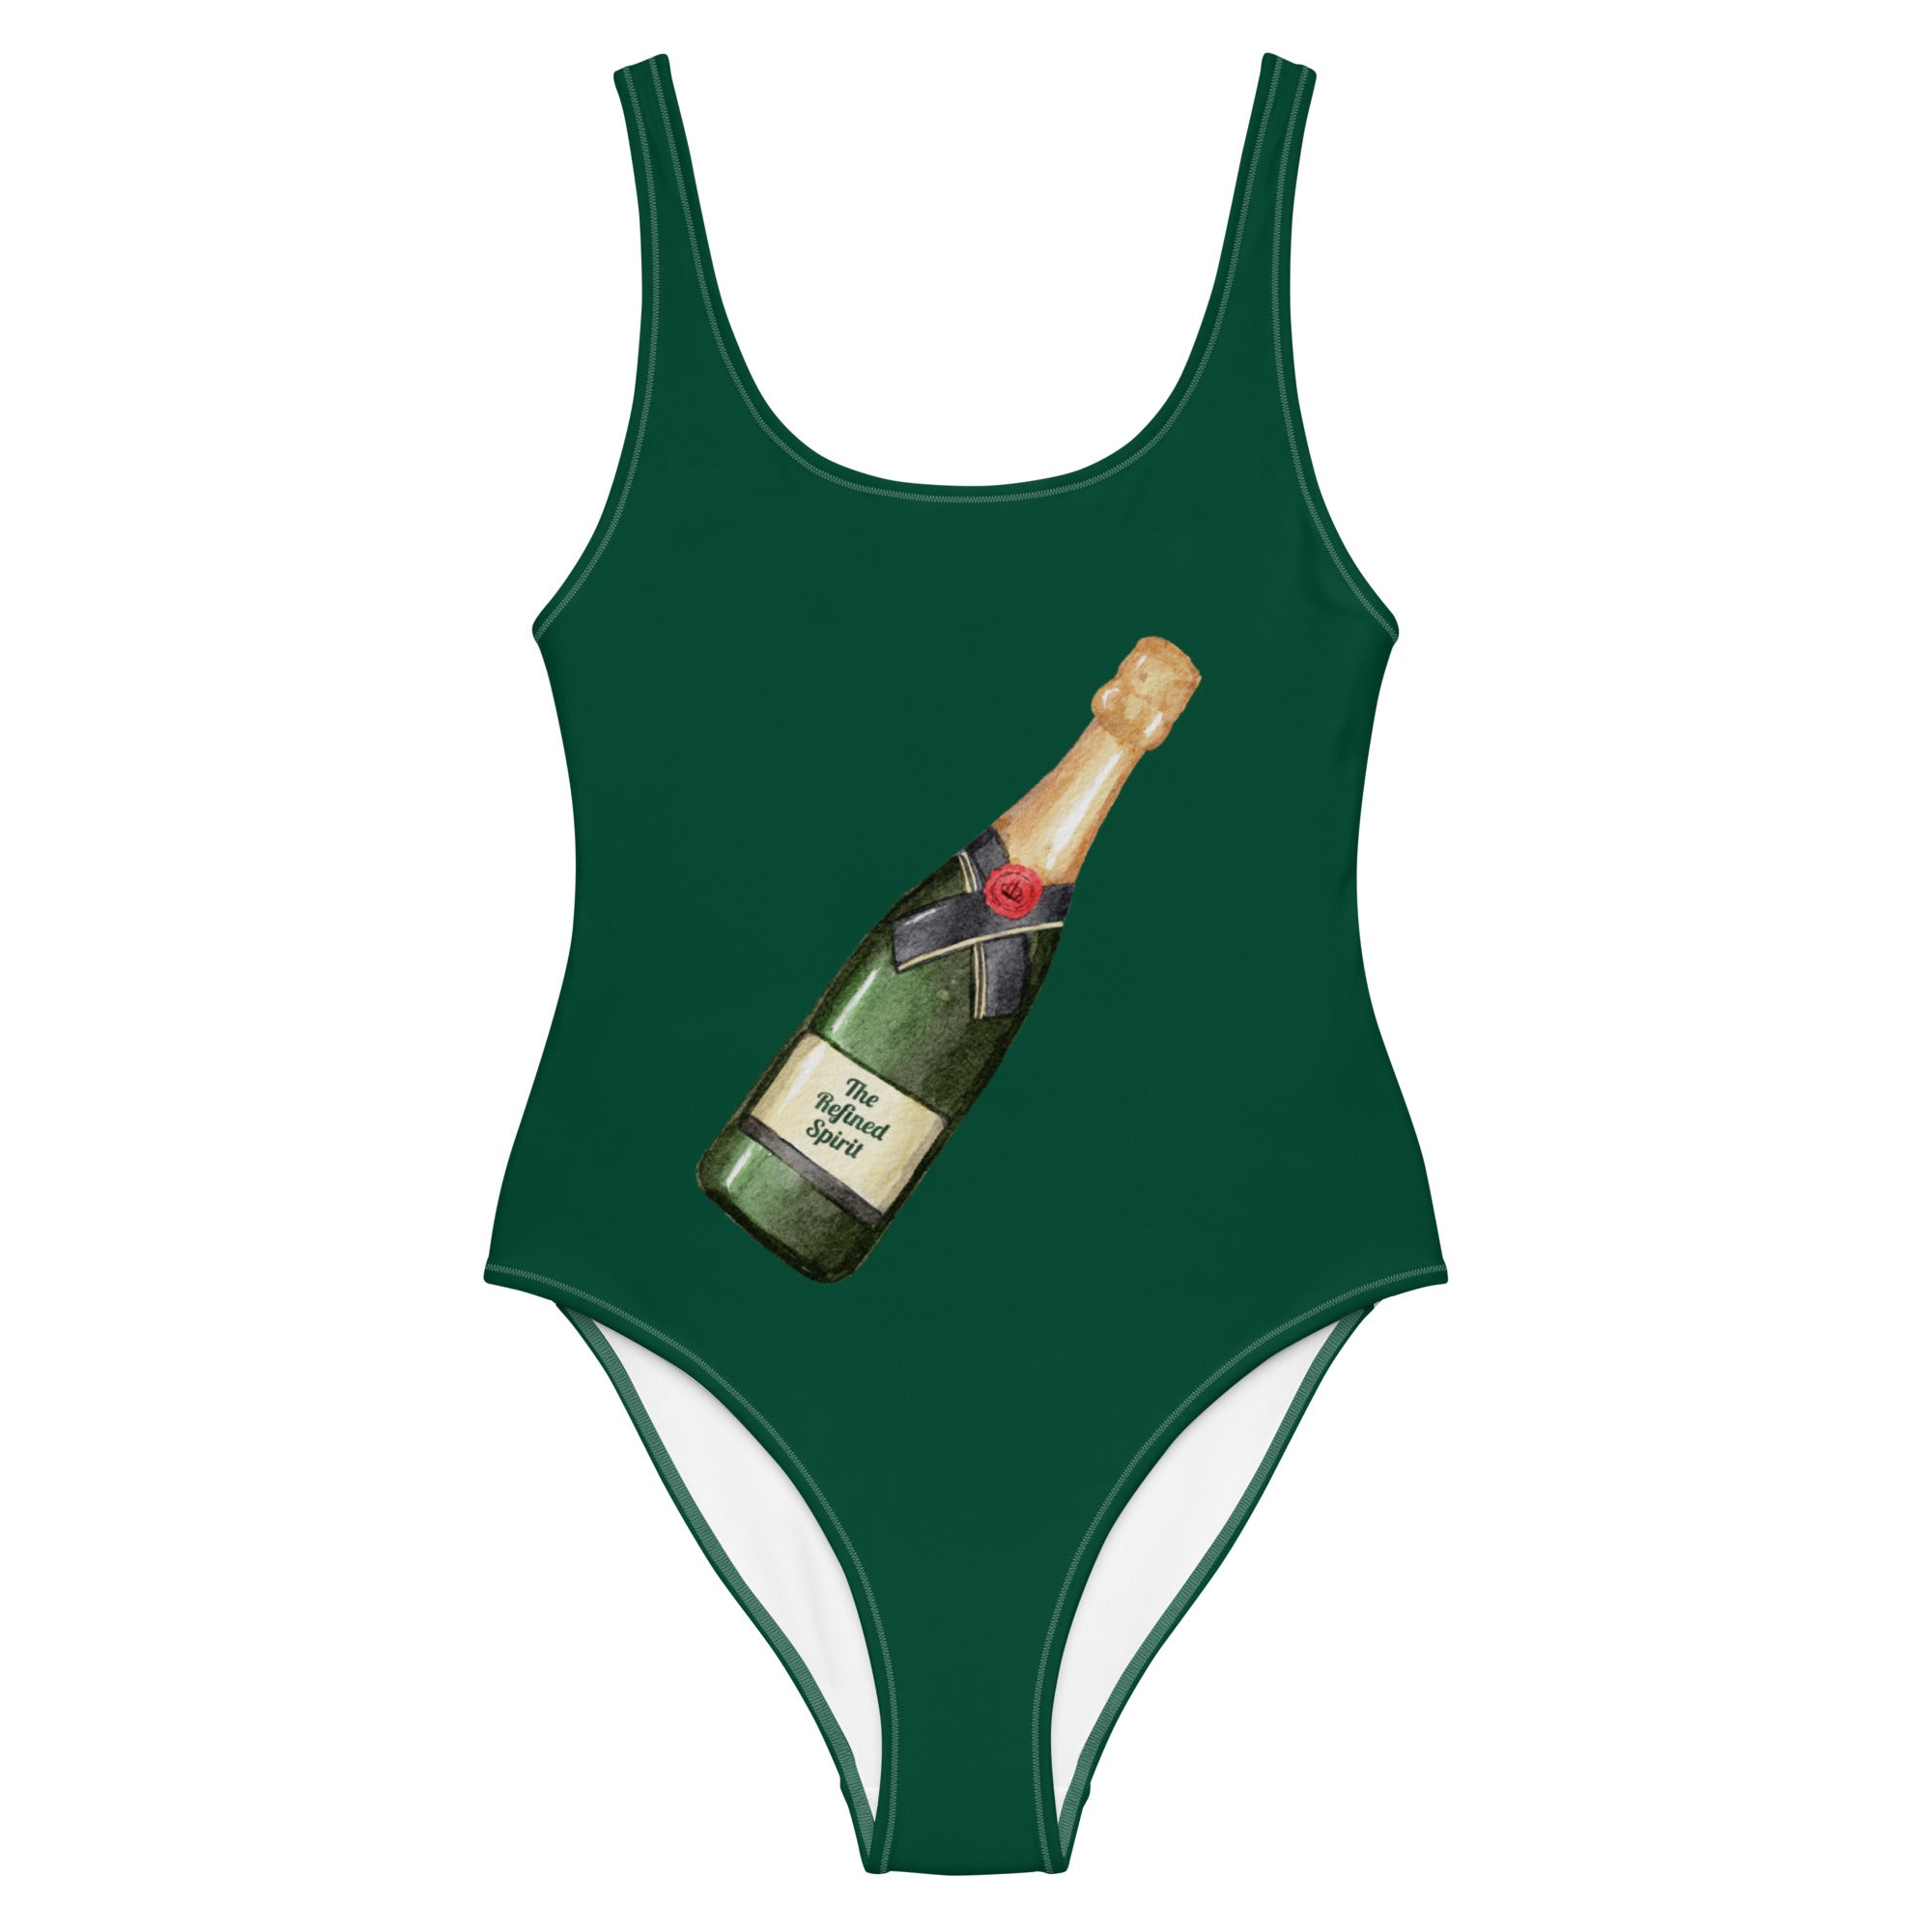 The Champagne Club - Swimsuit - The Refined Spirit